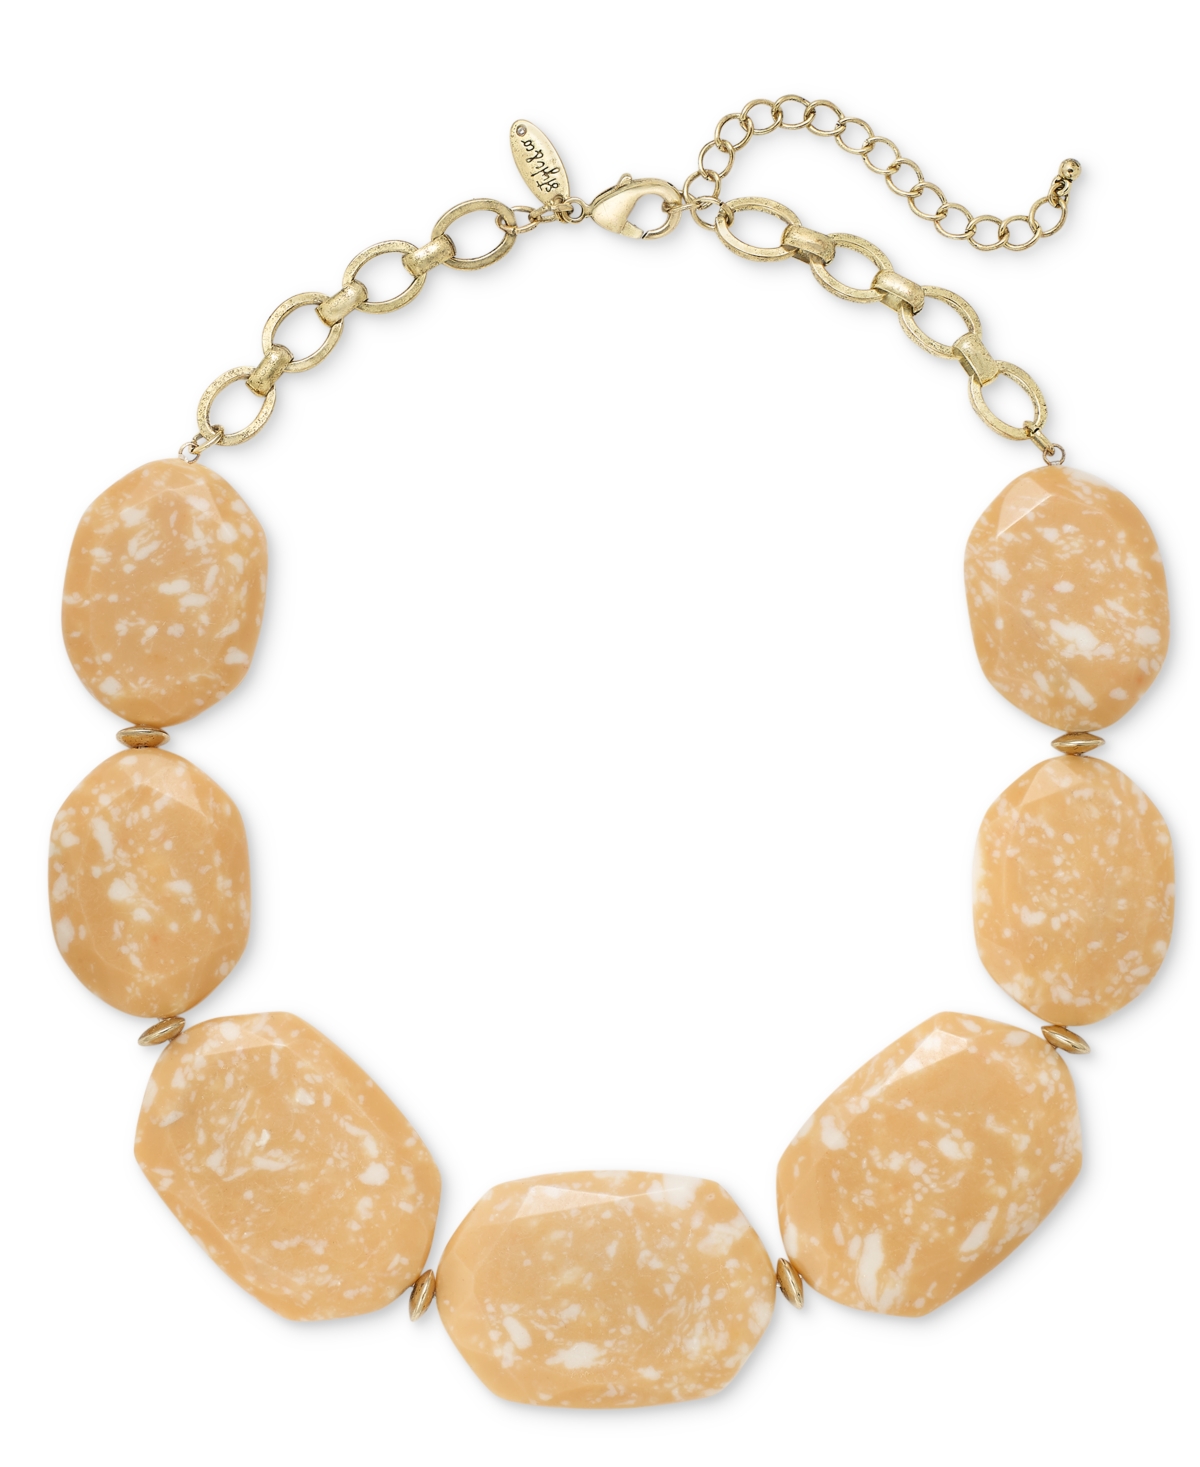 Gold-Tone Gemstone Statement Necklace, 19" + 3" extender, Created for Macy's - Brown